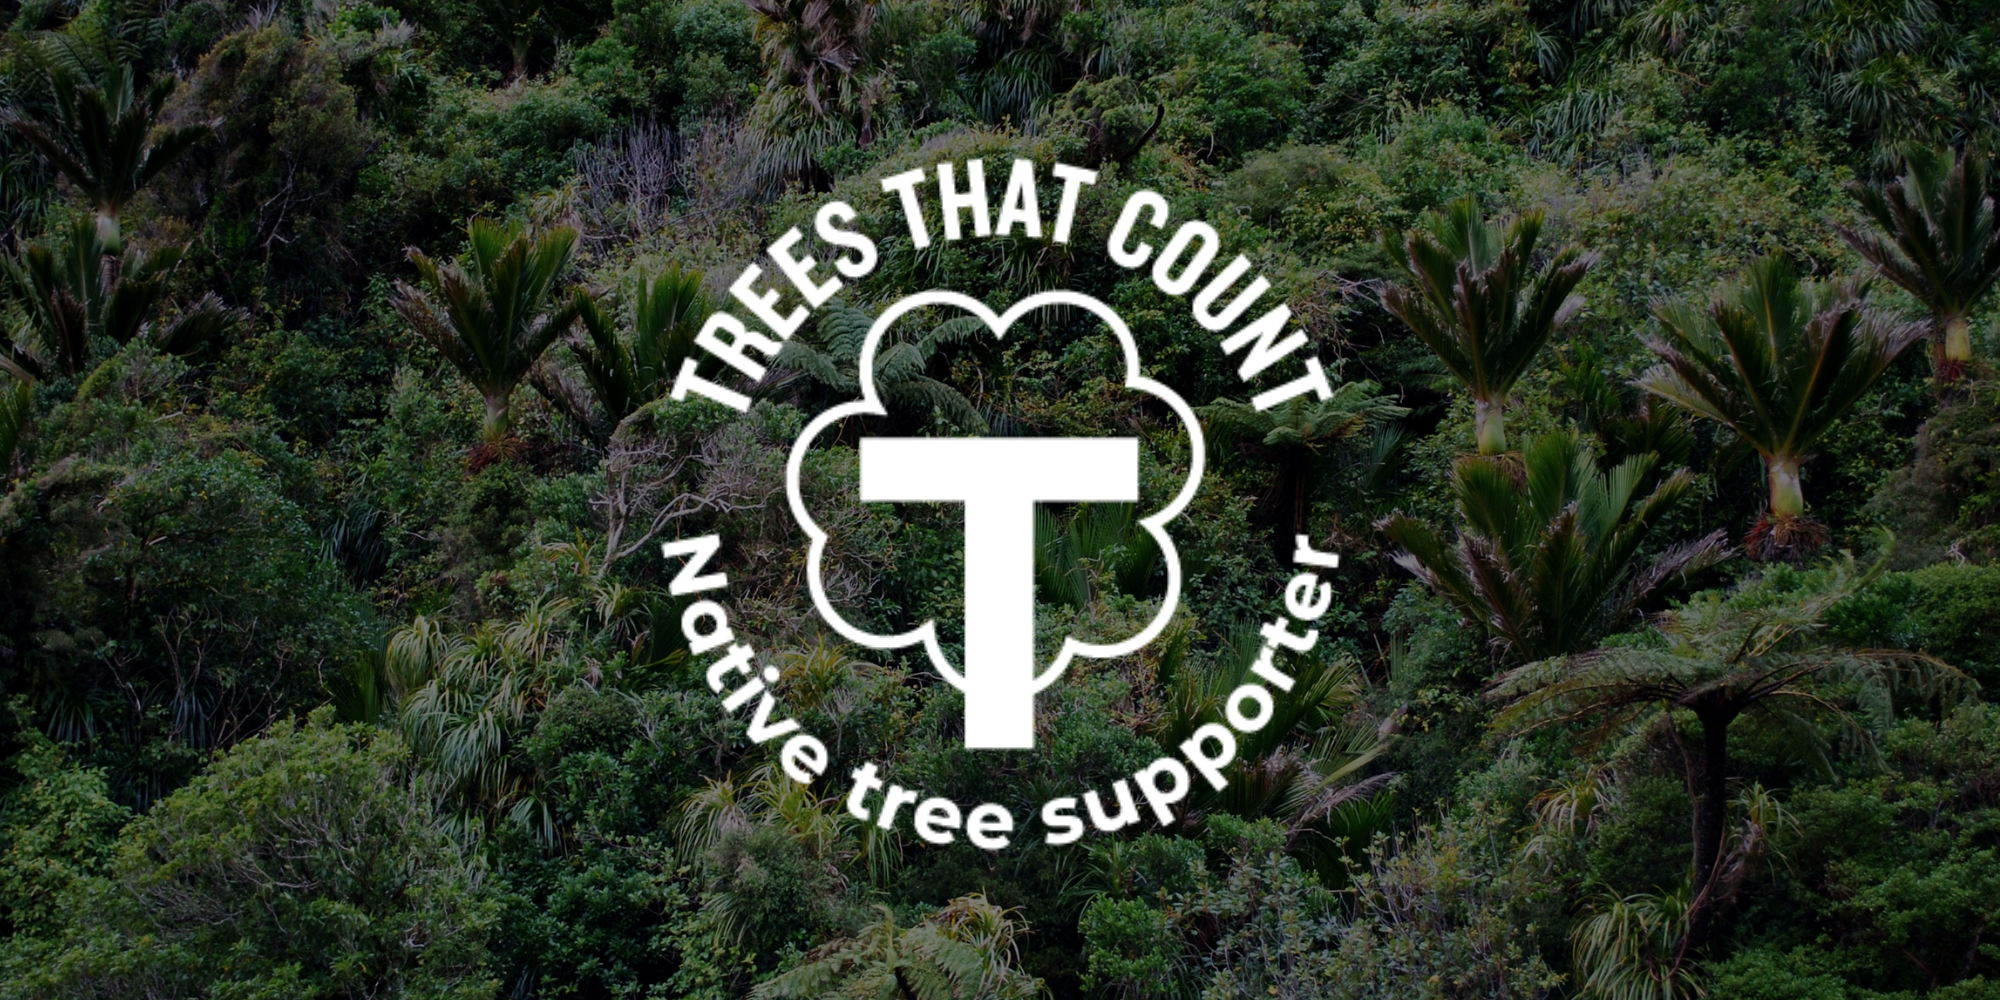 Trees that count logo against native New Zealand bush